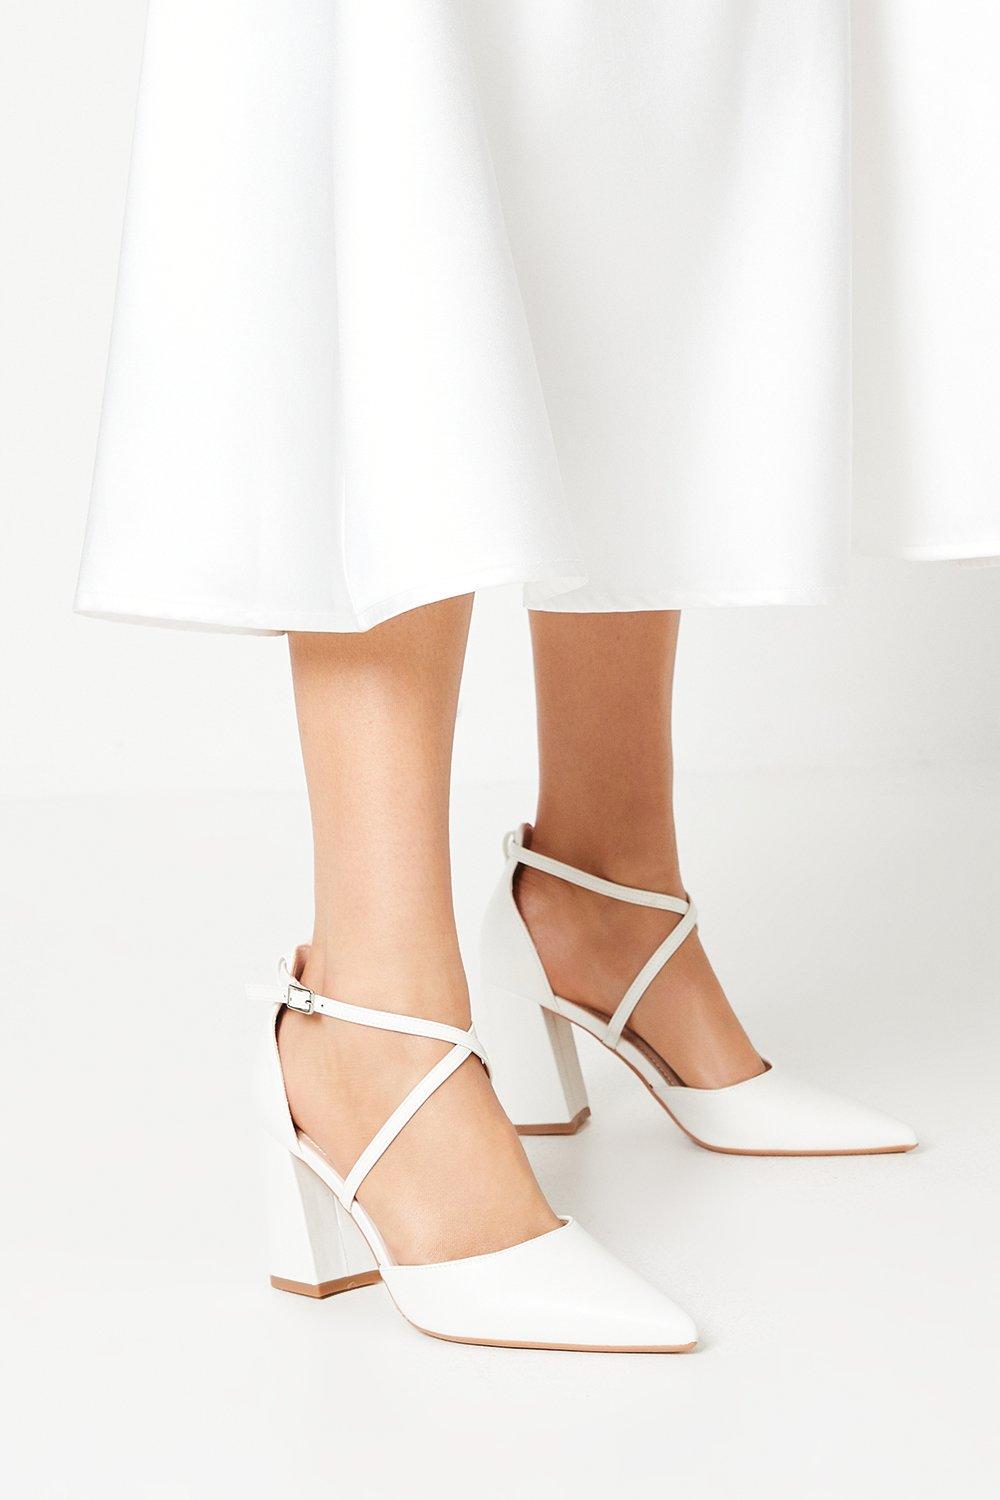 Treat Cross Strap Pointed Block Heel Court Shoes - White